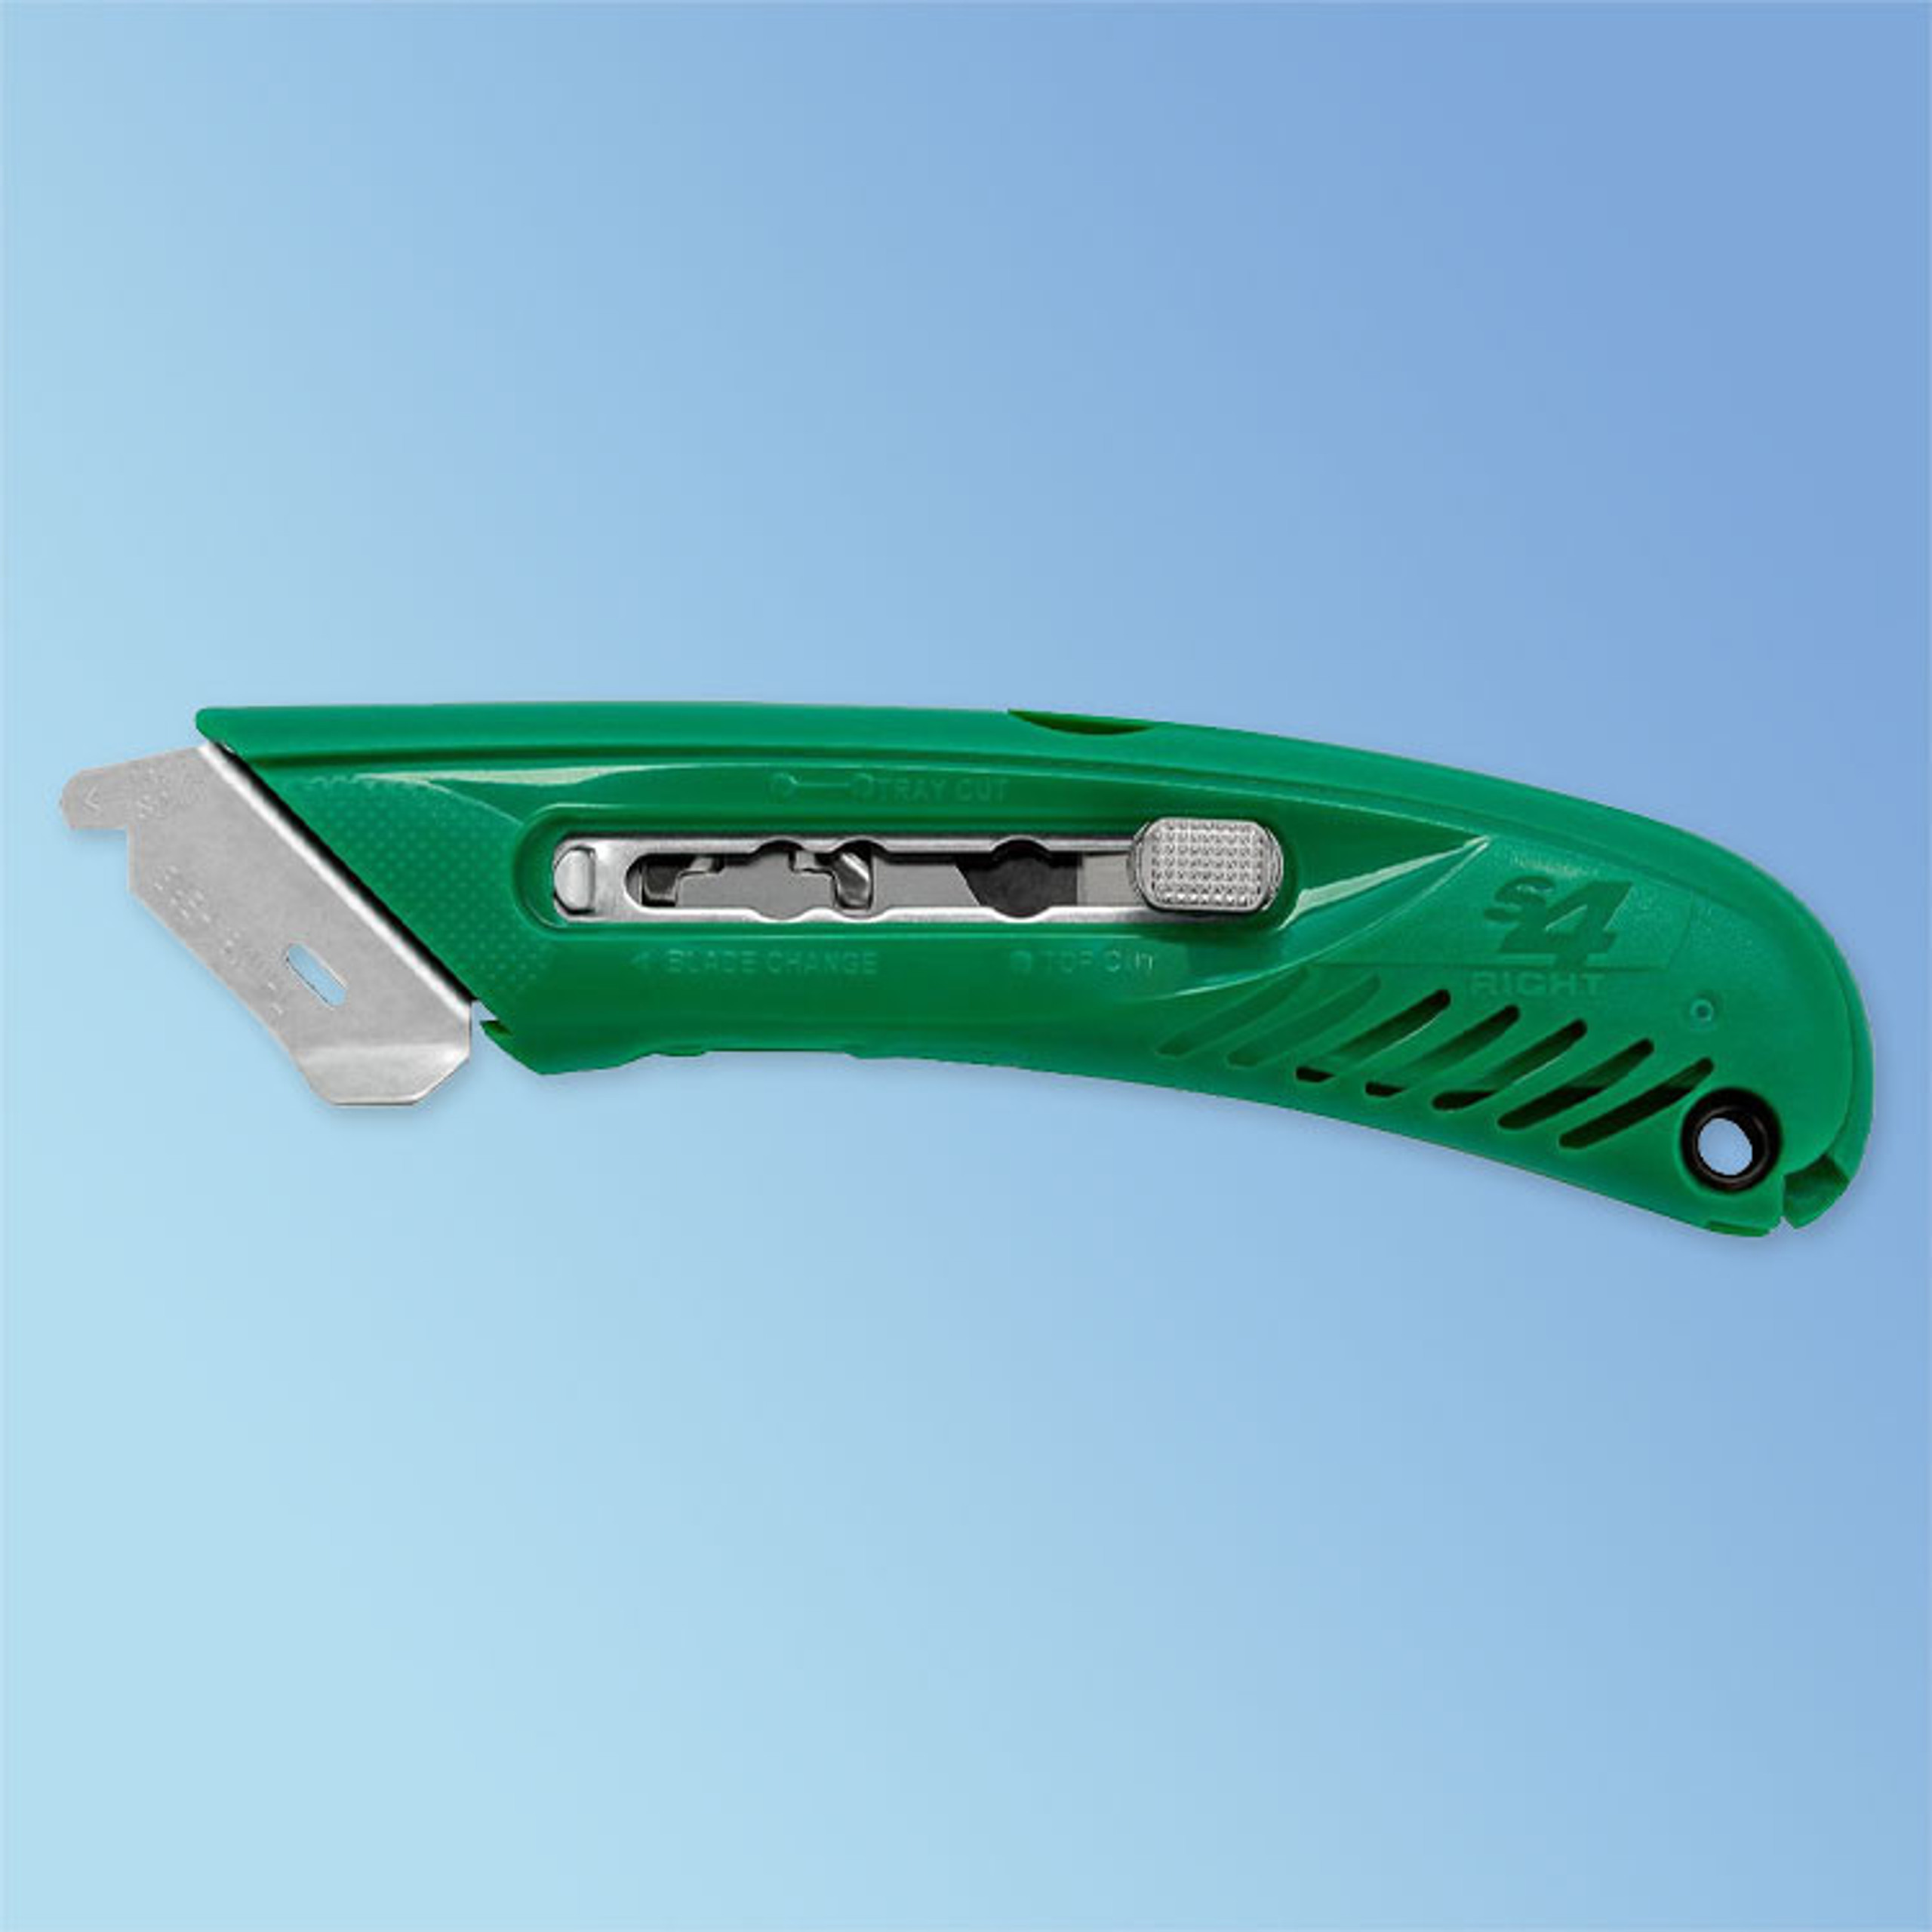 Pacific Handy Cutter S4R Safety Cutter